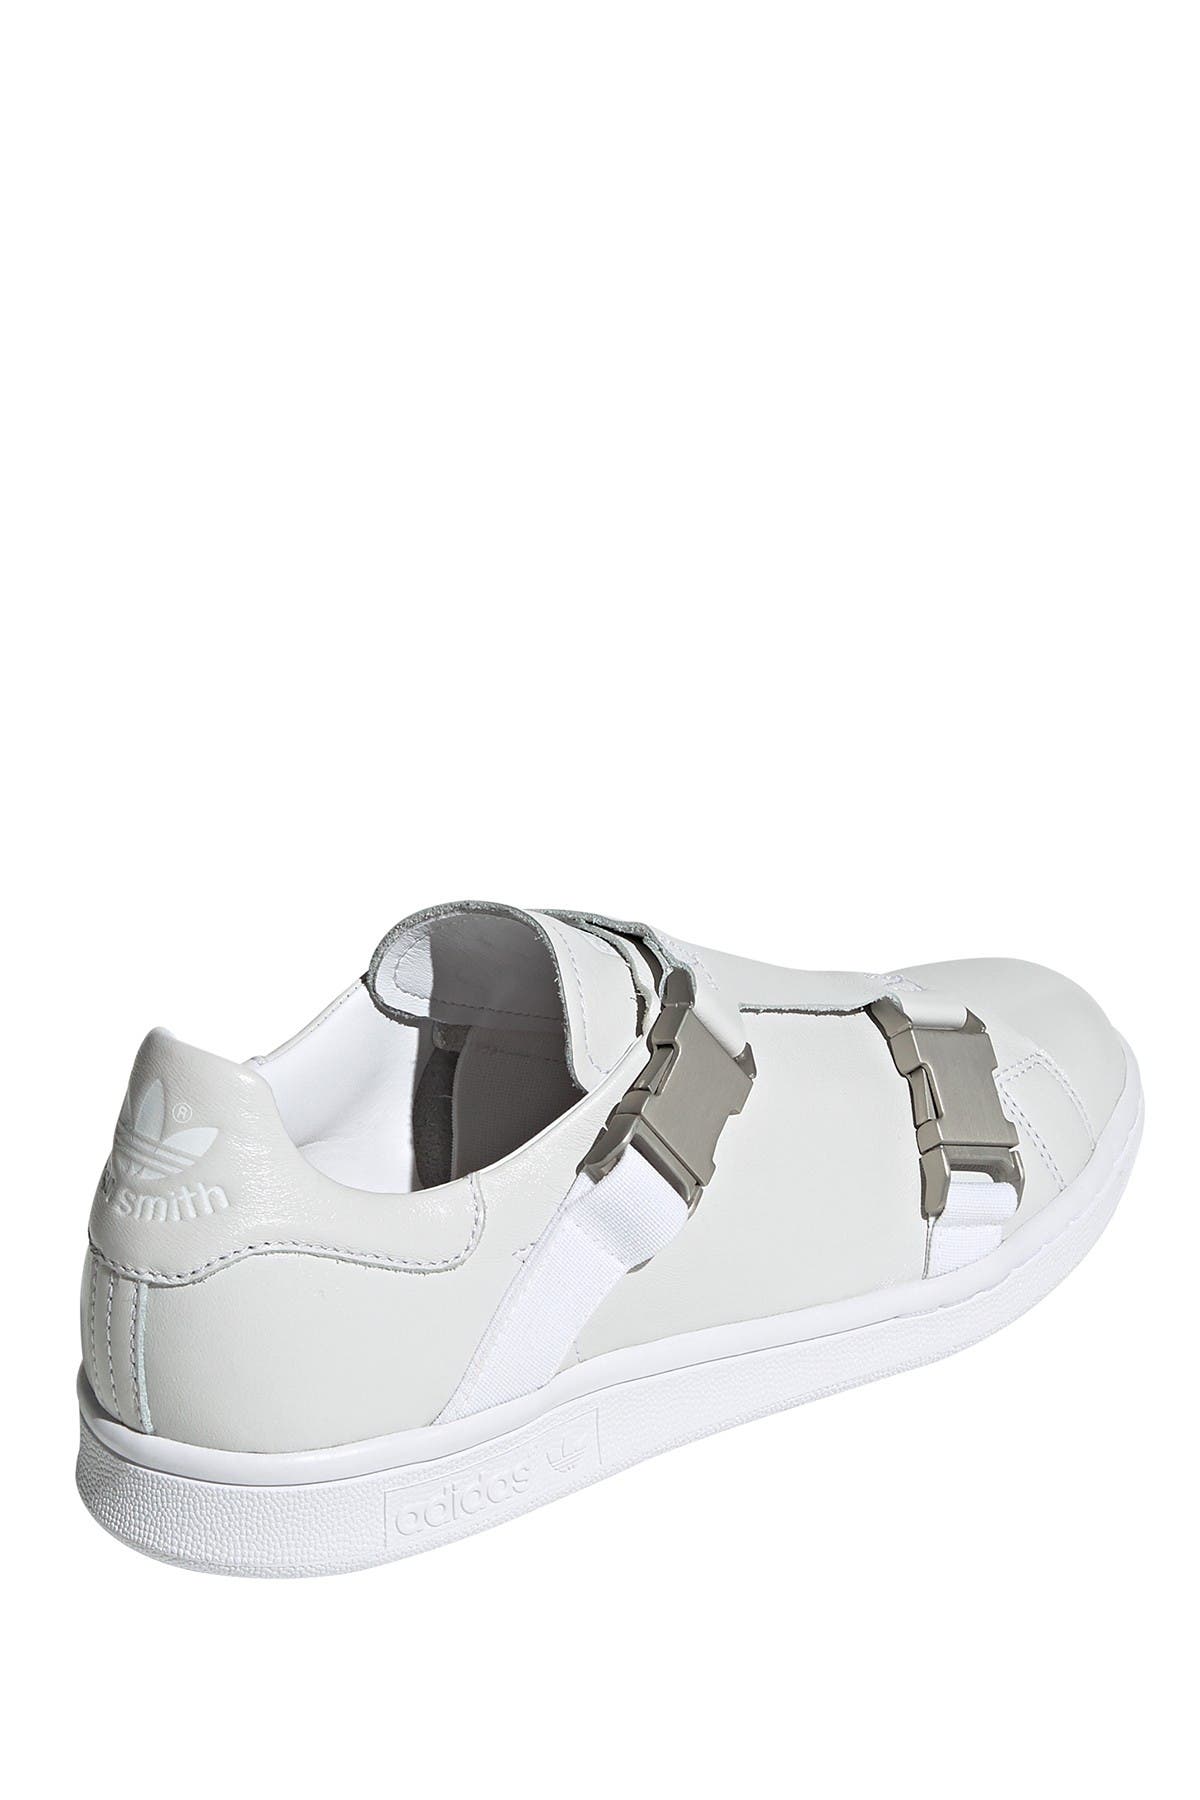 stan smith buckle shoes